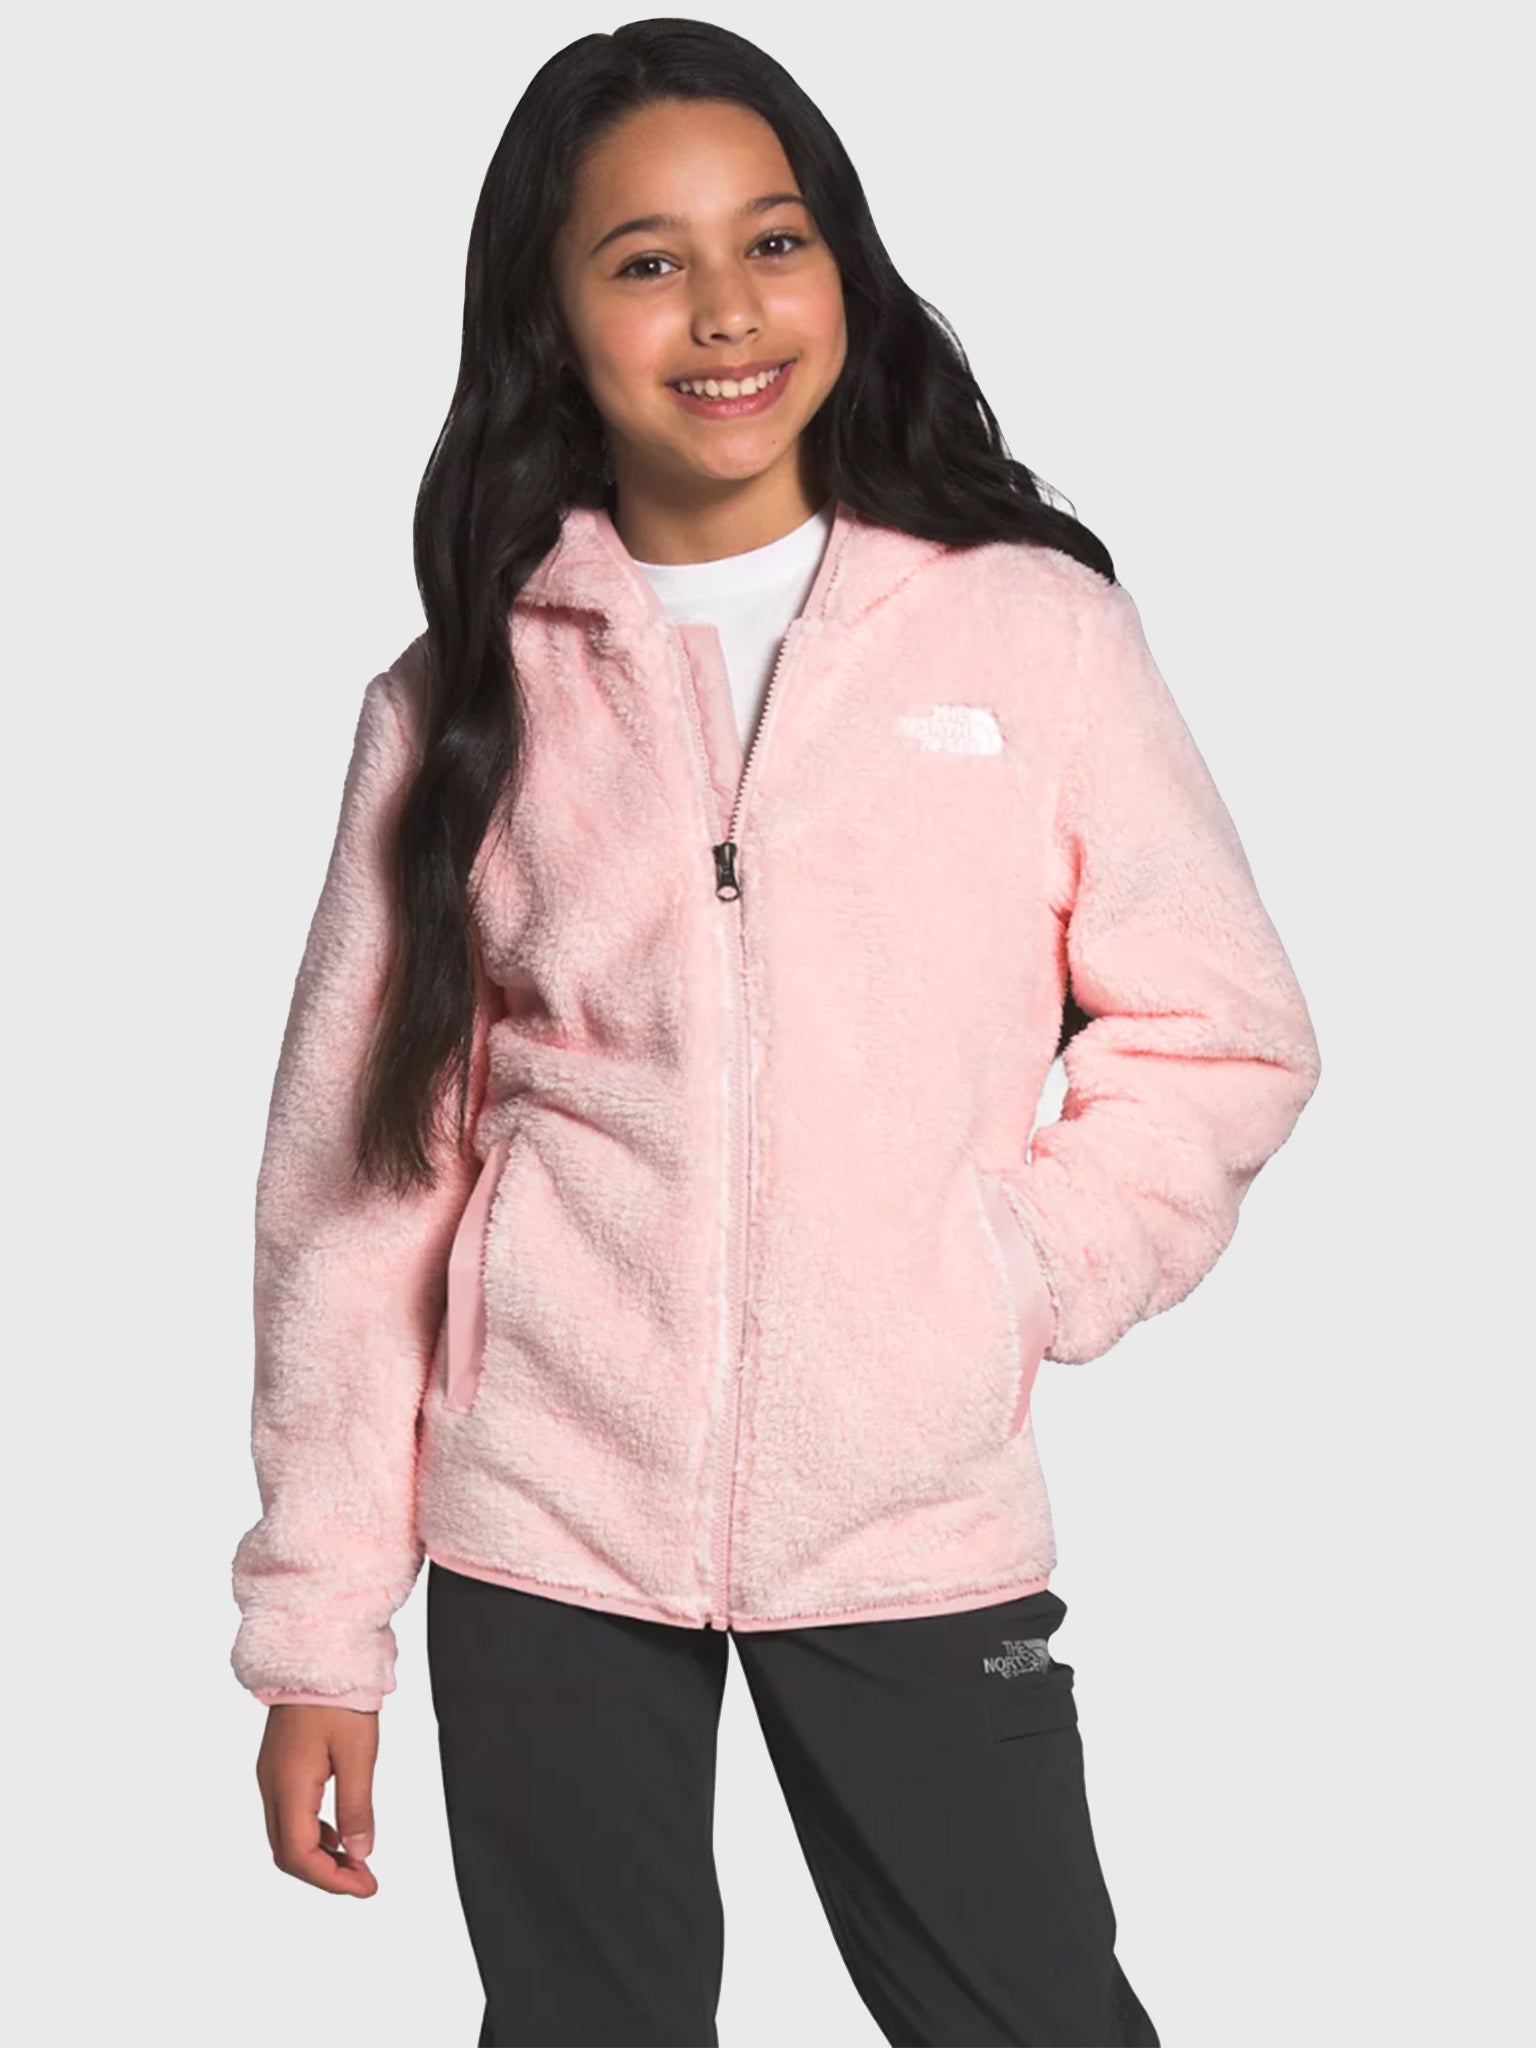 girls north face oso